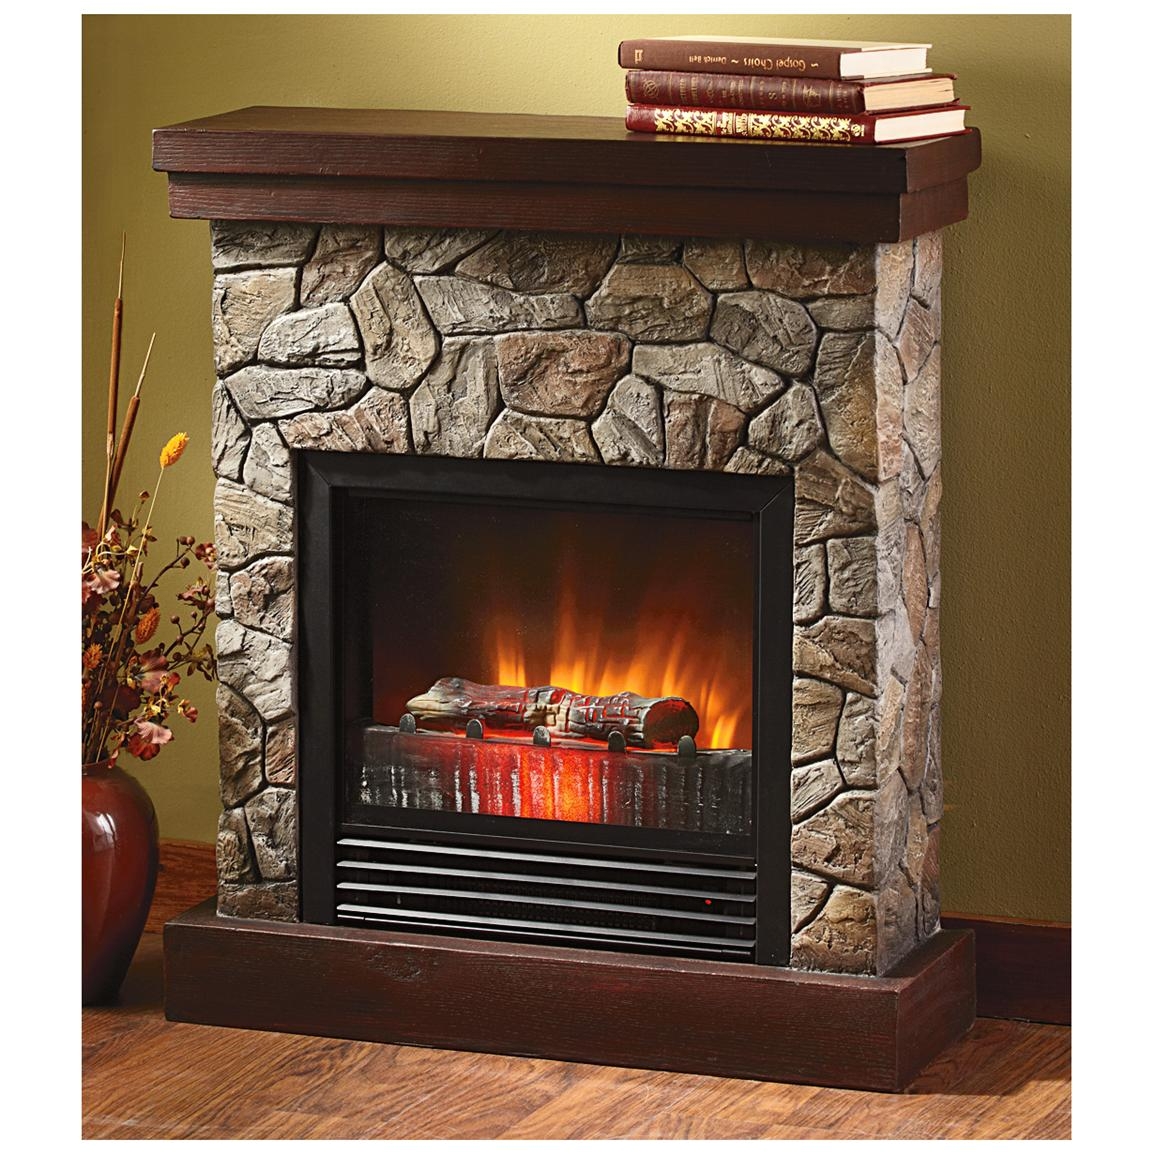 furniture organization elegant electric fireplace heater with remote control and stone wall decor for comfortable interior